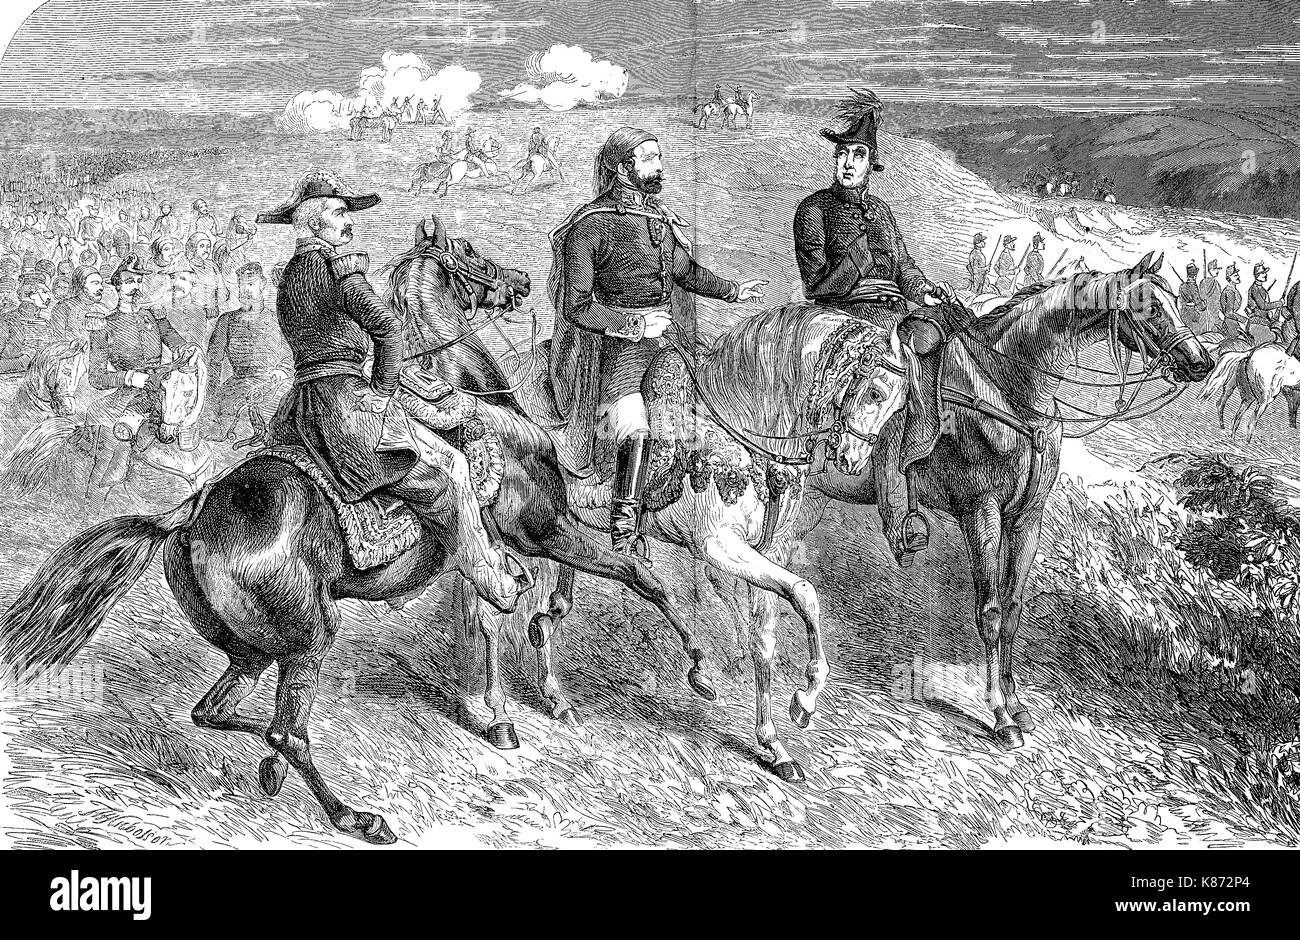 the generals Aimable-Jean-Jacques Pélissier, 1st Duc de Malakoff, Omar Pasha Latas and Lord Raglan, Crimean War, Siege of Sevastopol, 1855, Digital improved reproduction of an original woodprint from the 19th century Stock Photo